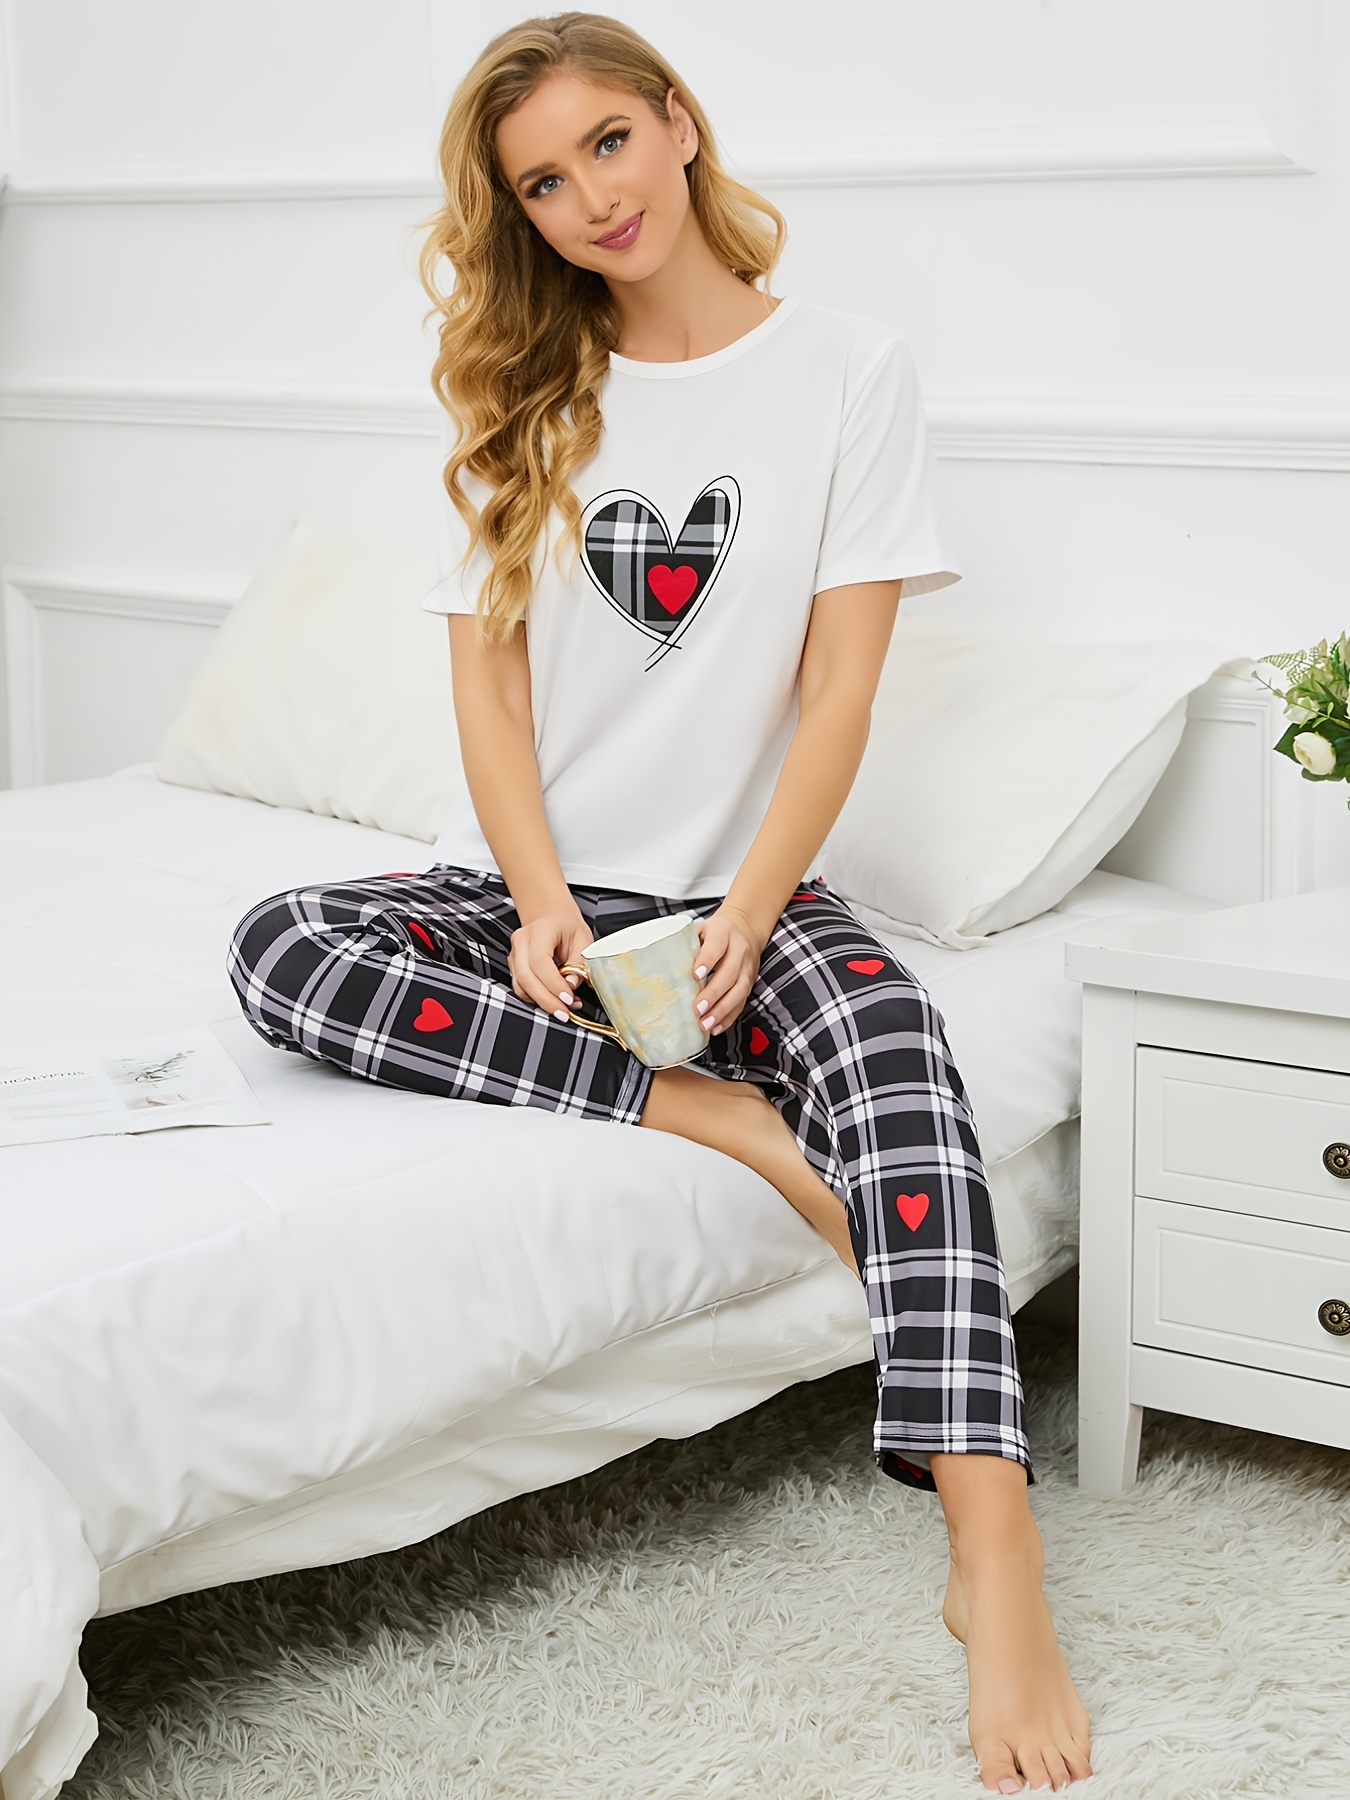 Cheap Women's Fashion Short Sleeve Round Neck Pullover Top Plaid Pants Set  Loose Comfortable Home Outfit Sleepwear Homewear Pajamas 2PCS